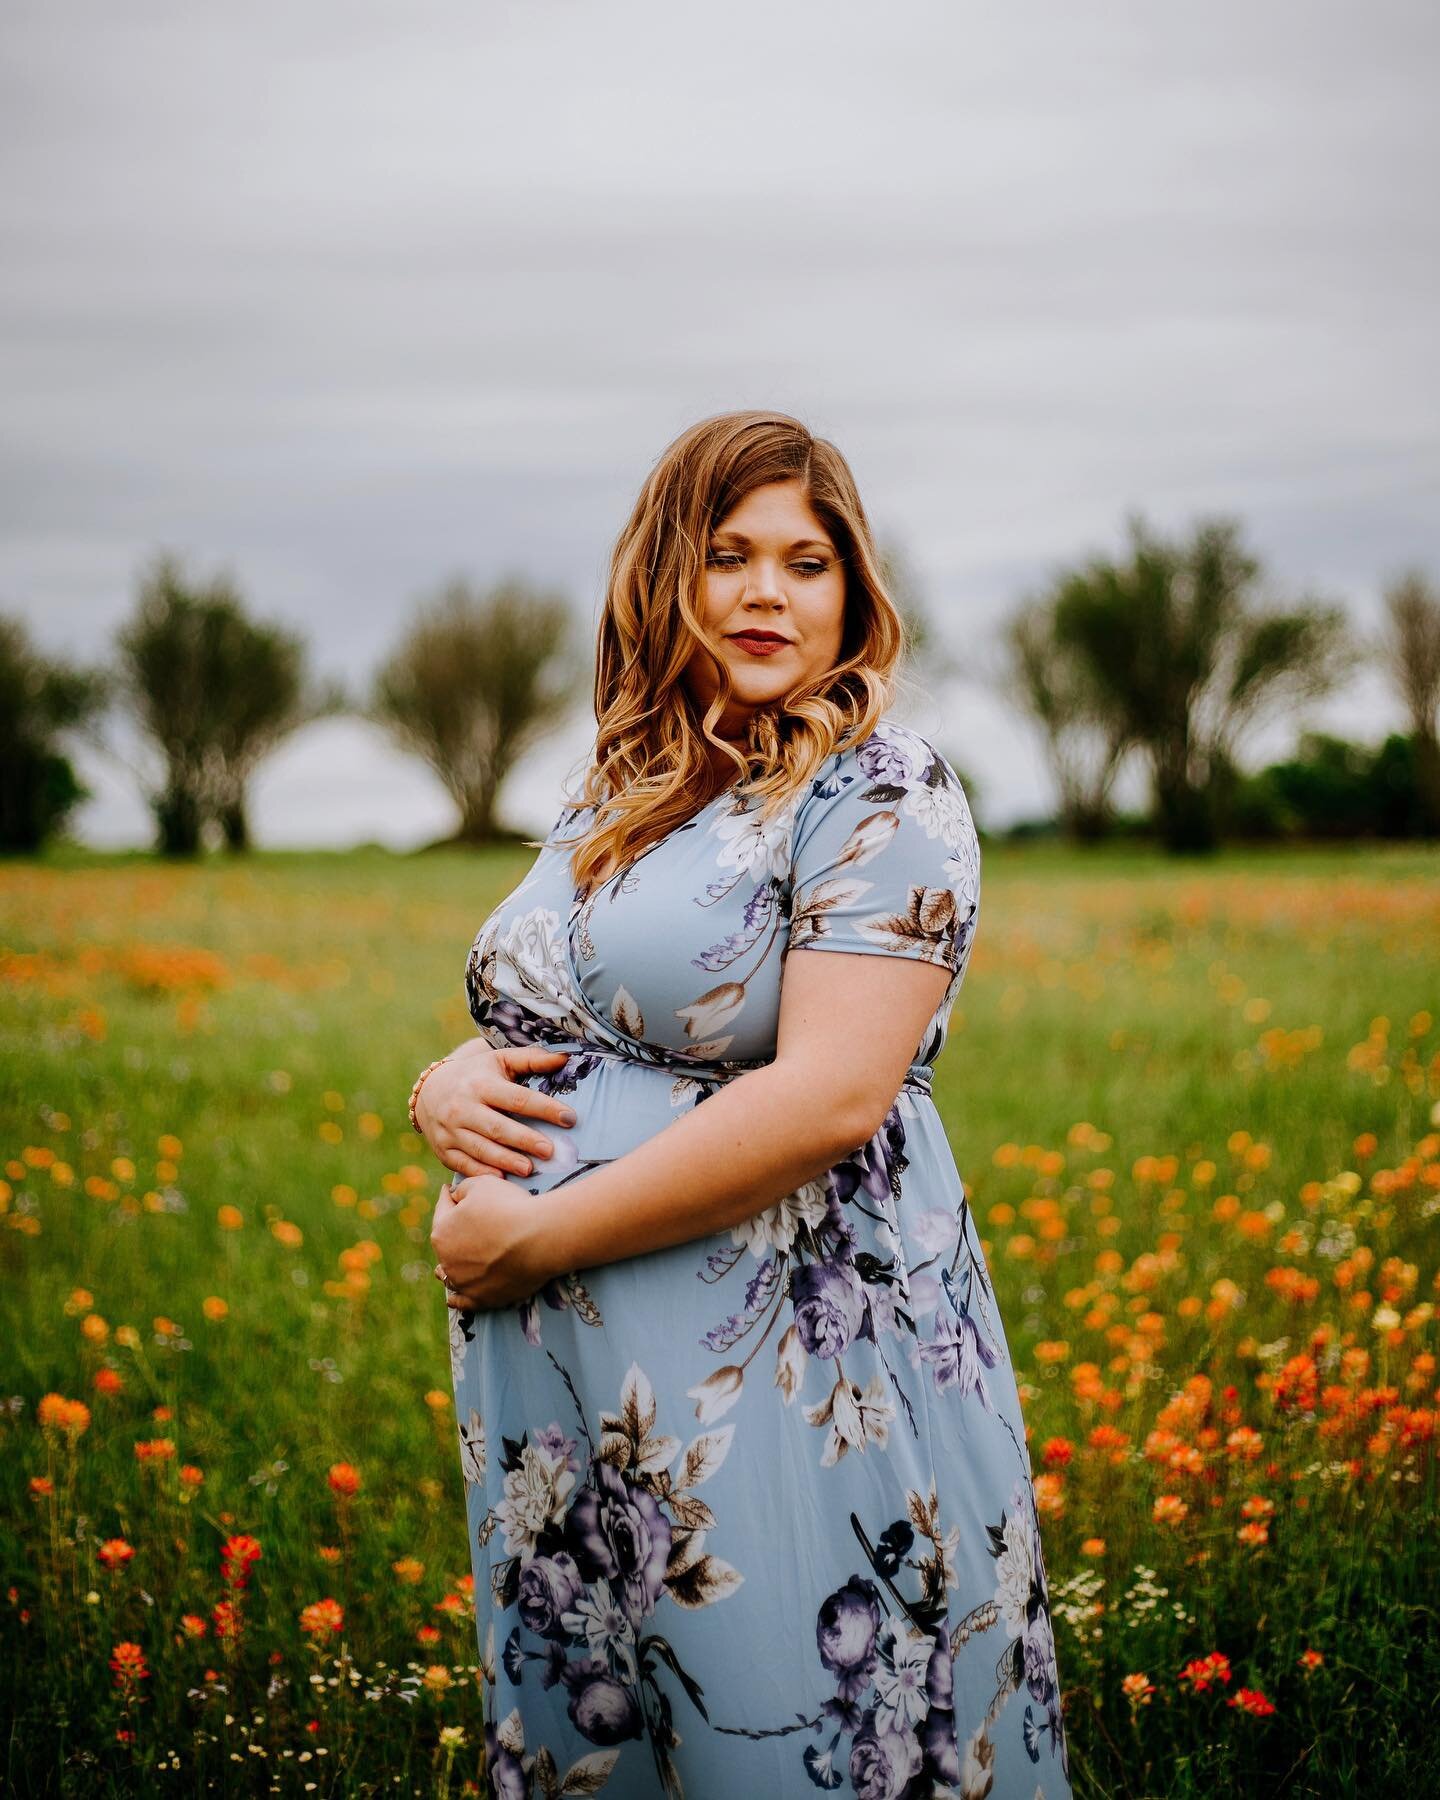 Missing this whimsical, overcast maternity session on this cloudy day 🤍

Keeping up with these mamas after their babies are born is one of the things I find so rewarding about what I get to do. This mama has the kindest heart and the sweetest soul a